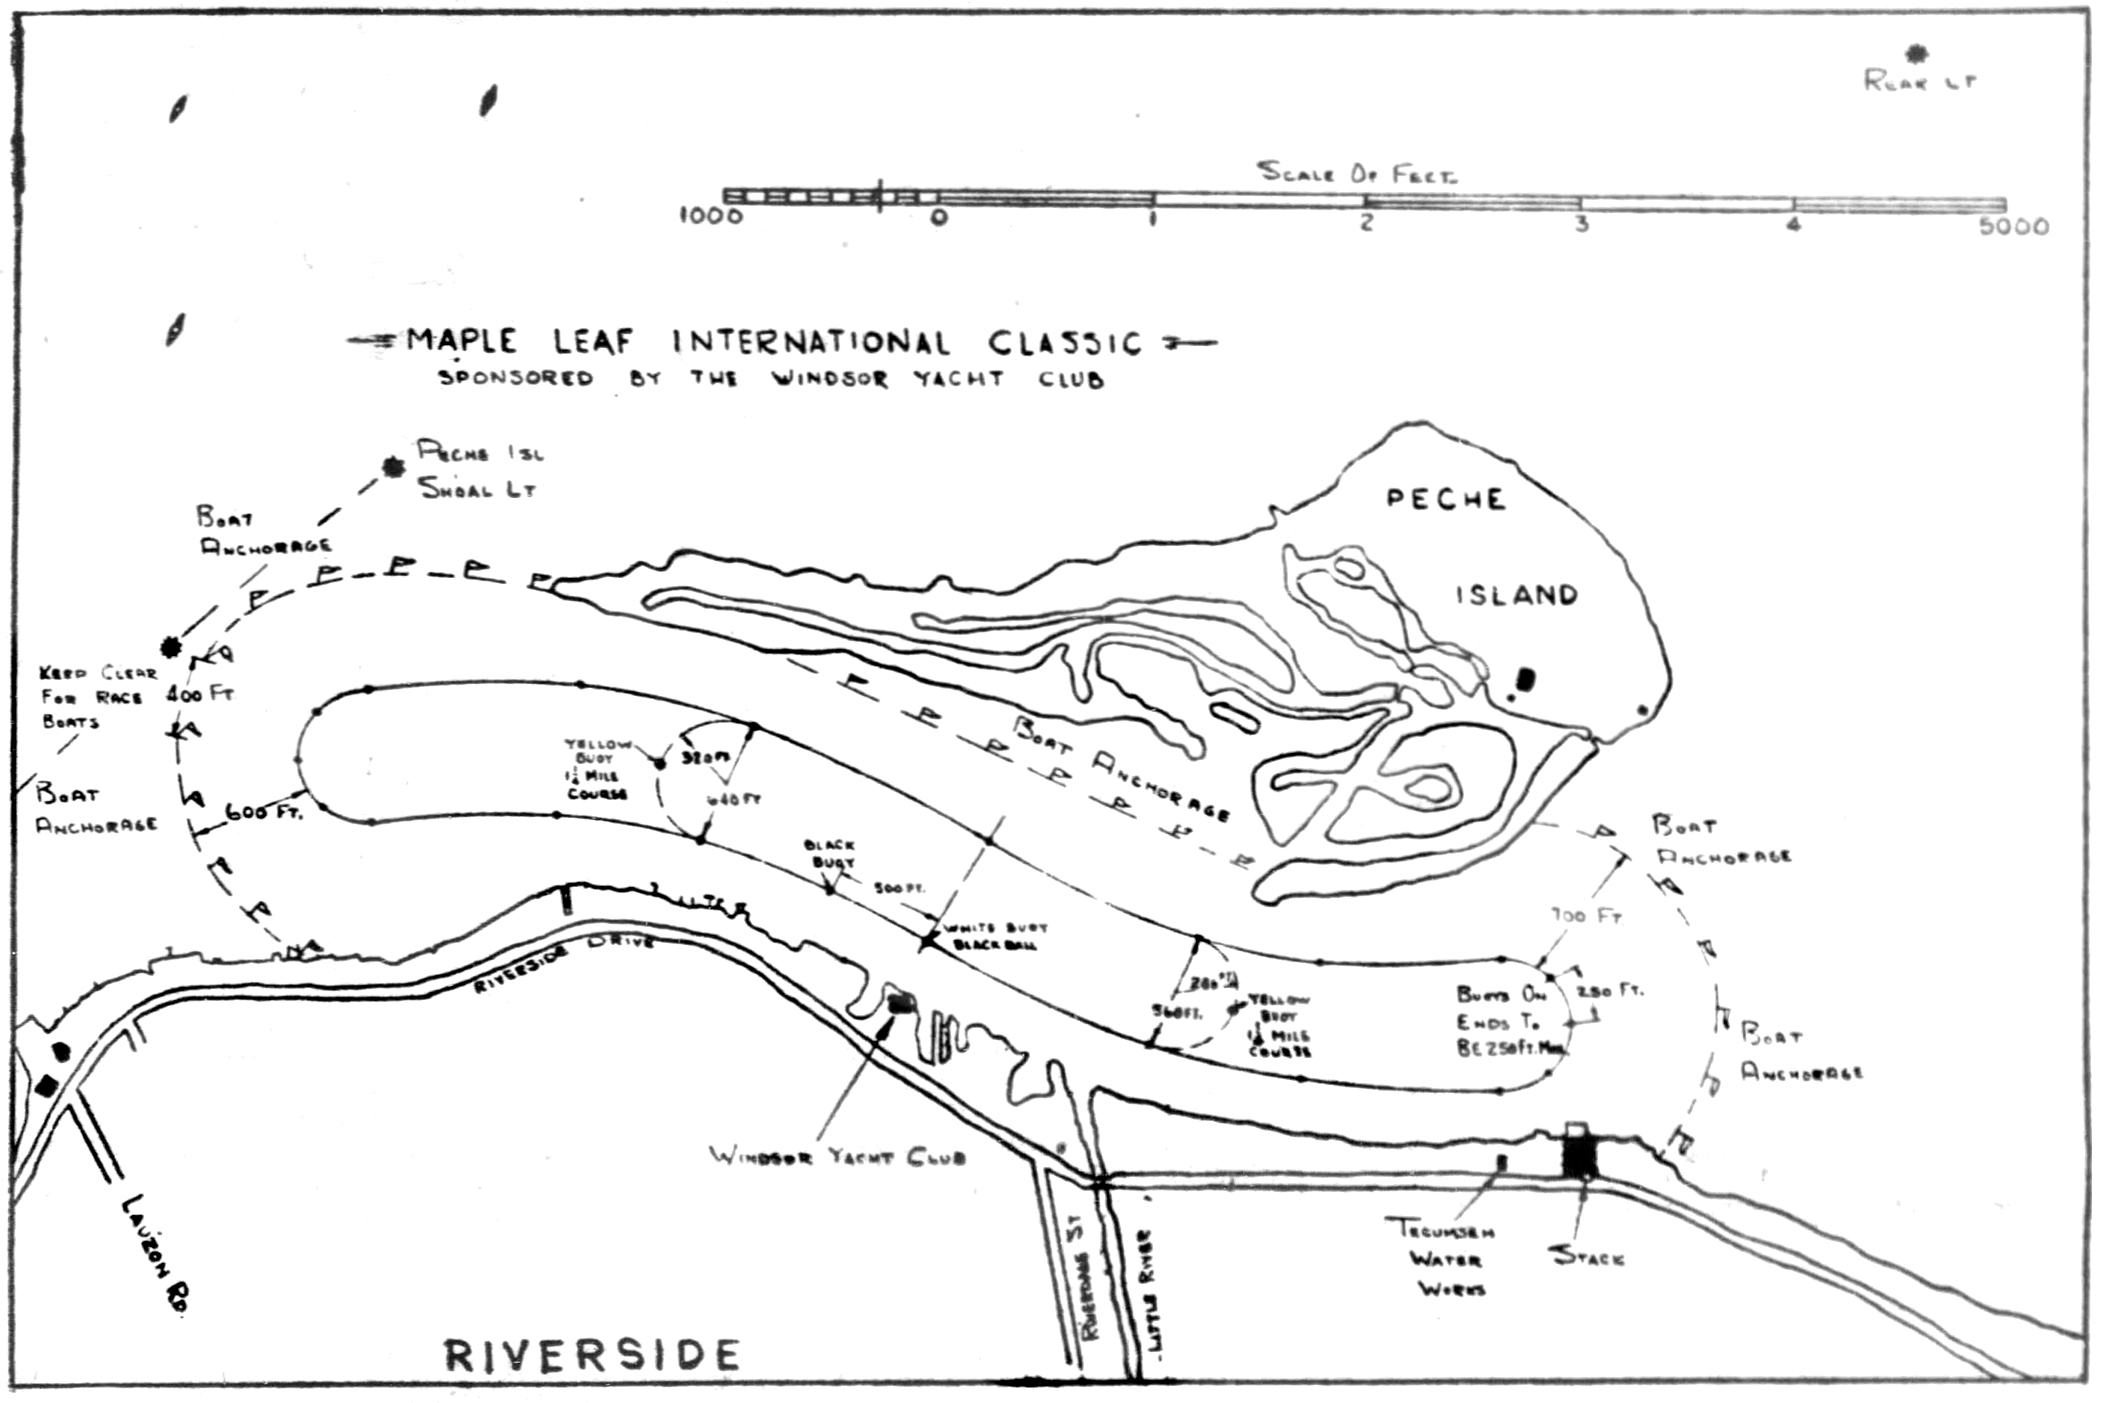 Here is a map showing the course